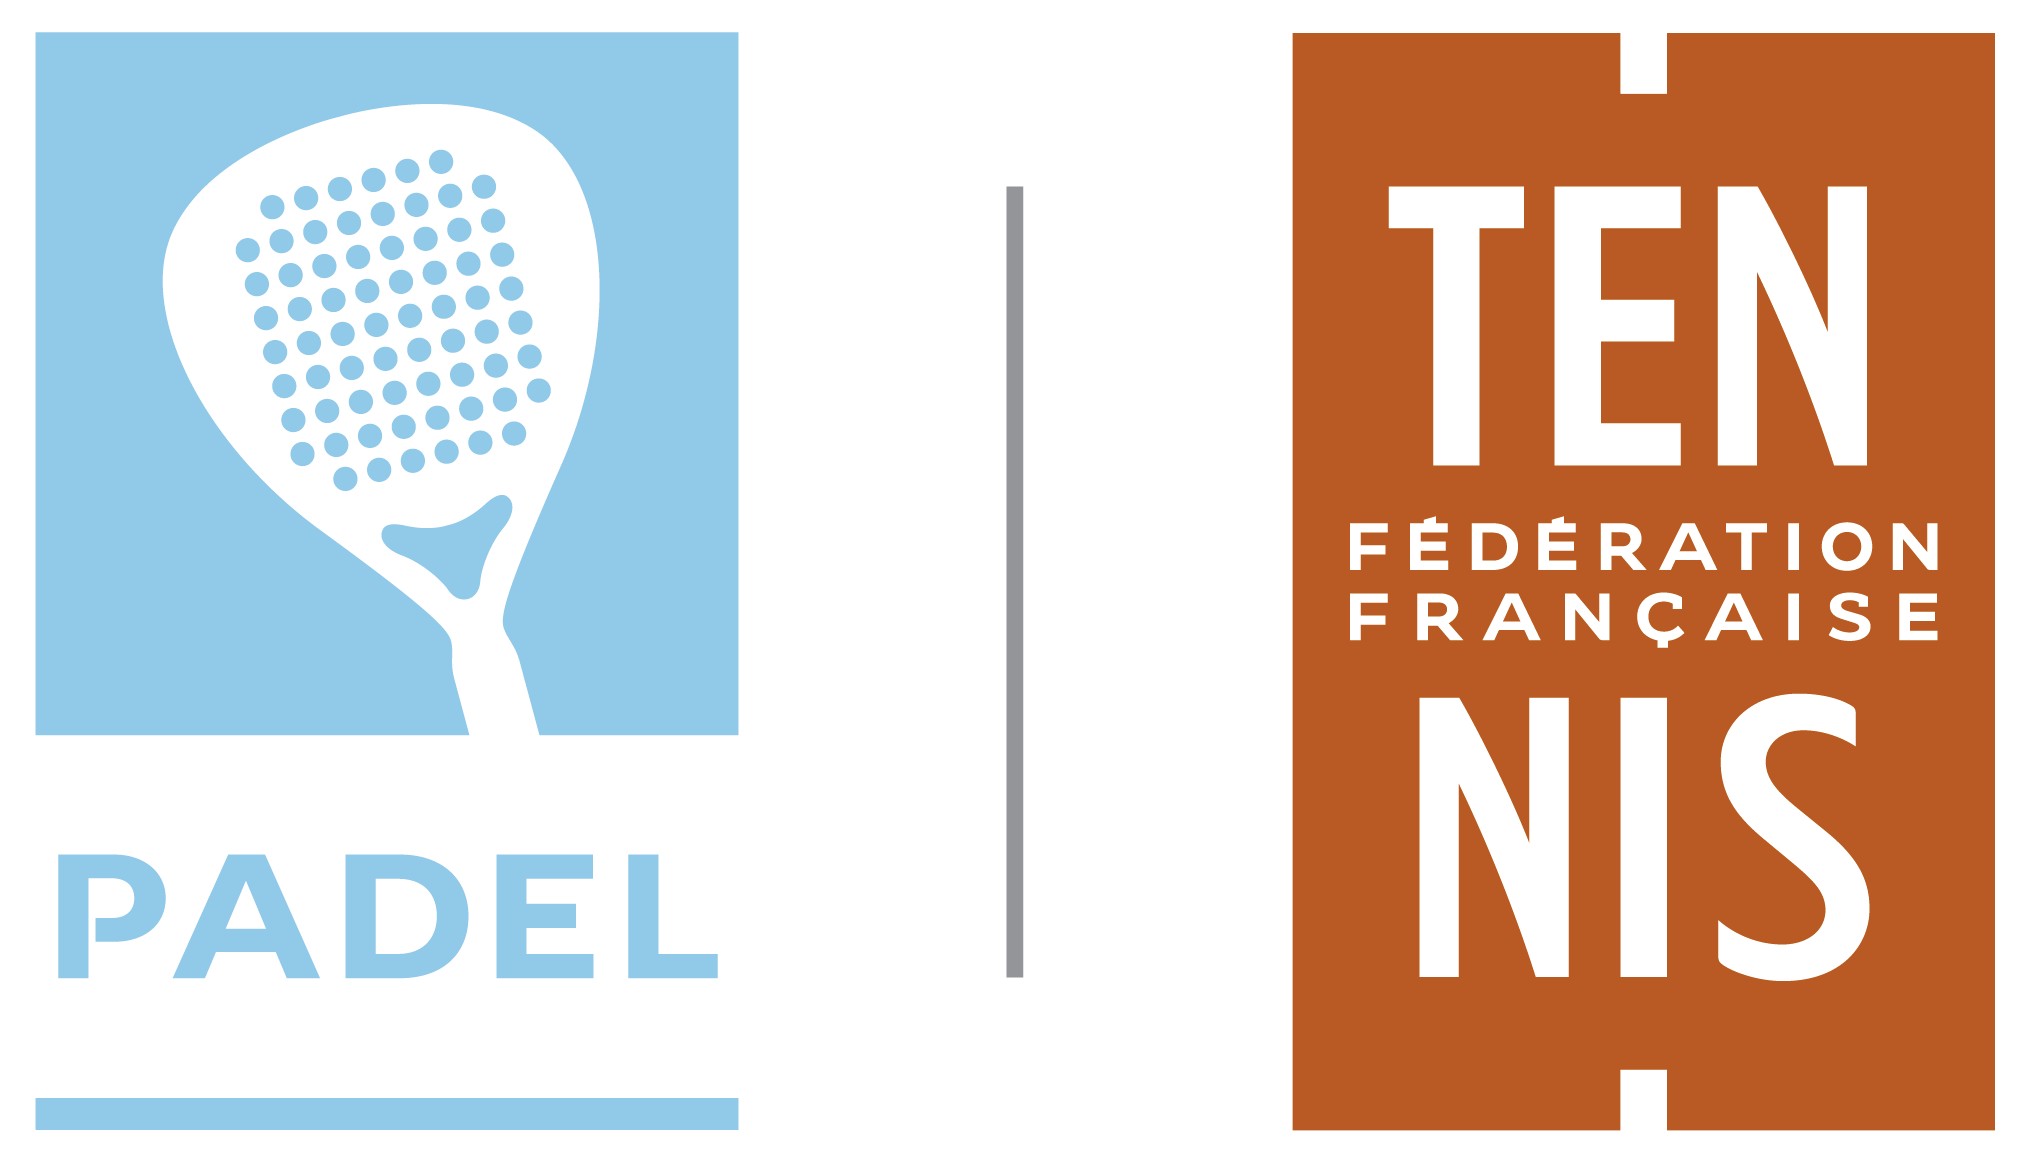 How to get your license padel - FFT?